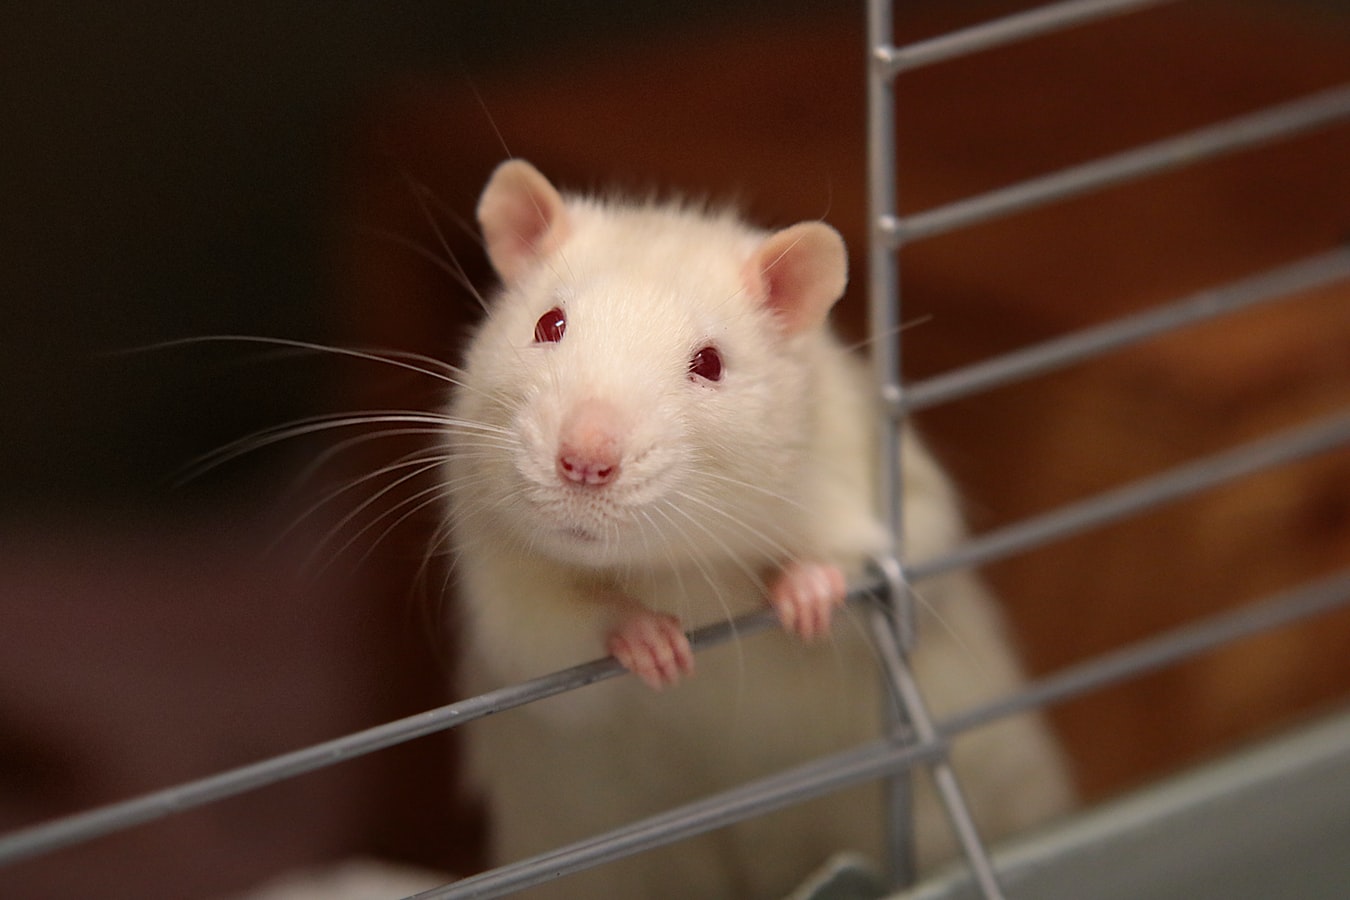 Scientists Discover Addiction Gene For Cocaine In Lab Rats